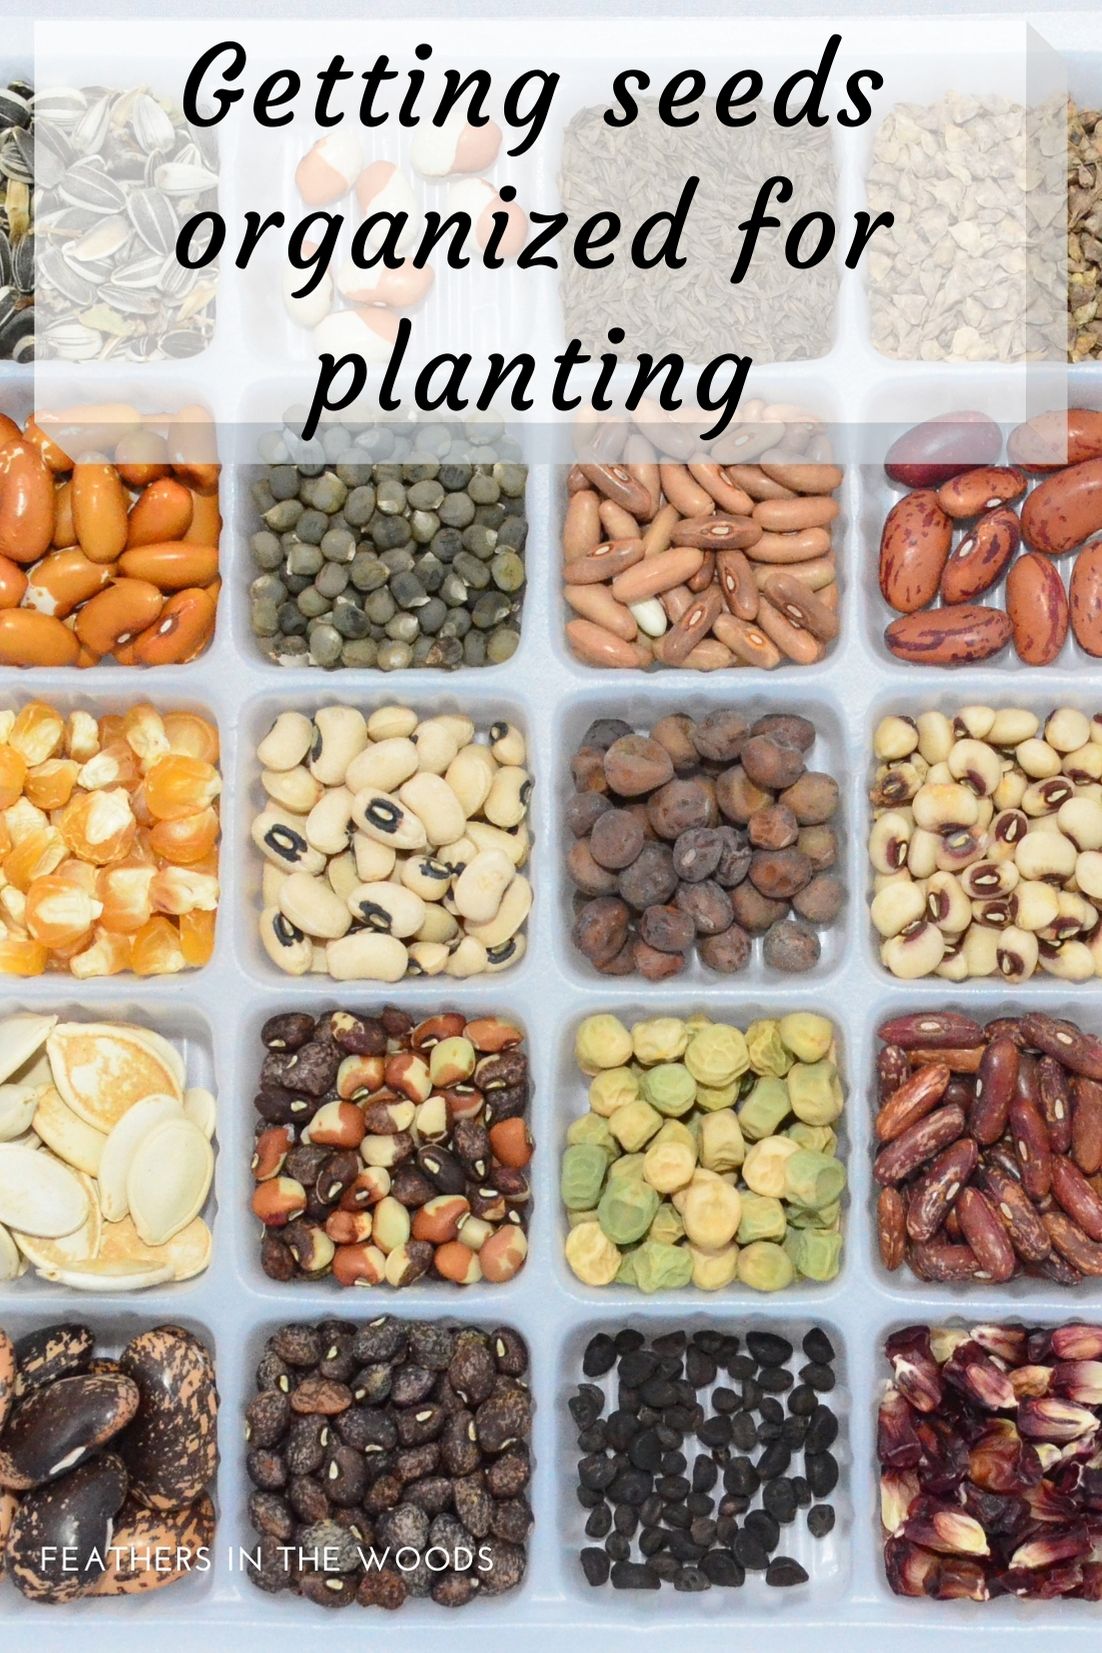 How to Store Seeds & Keep Seeds Organized